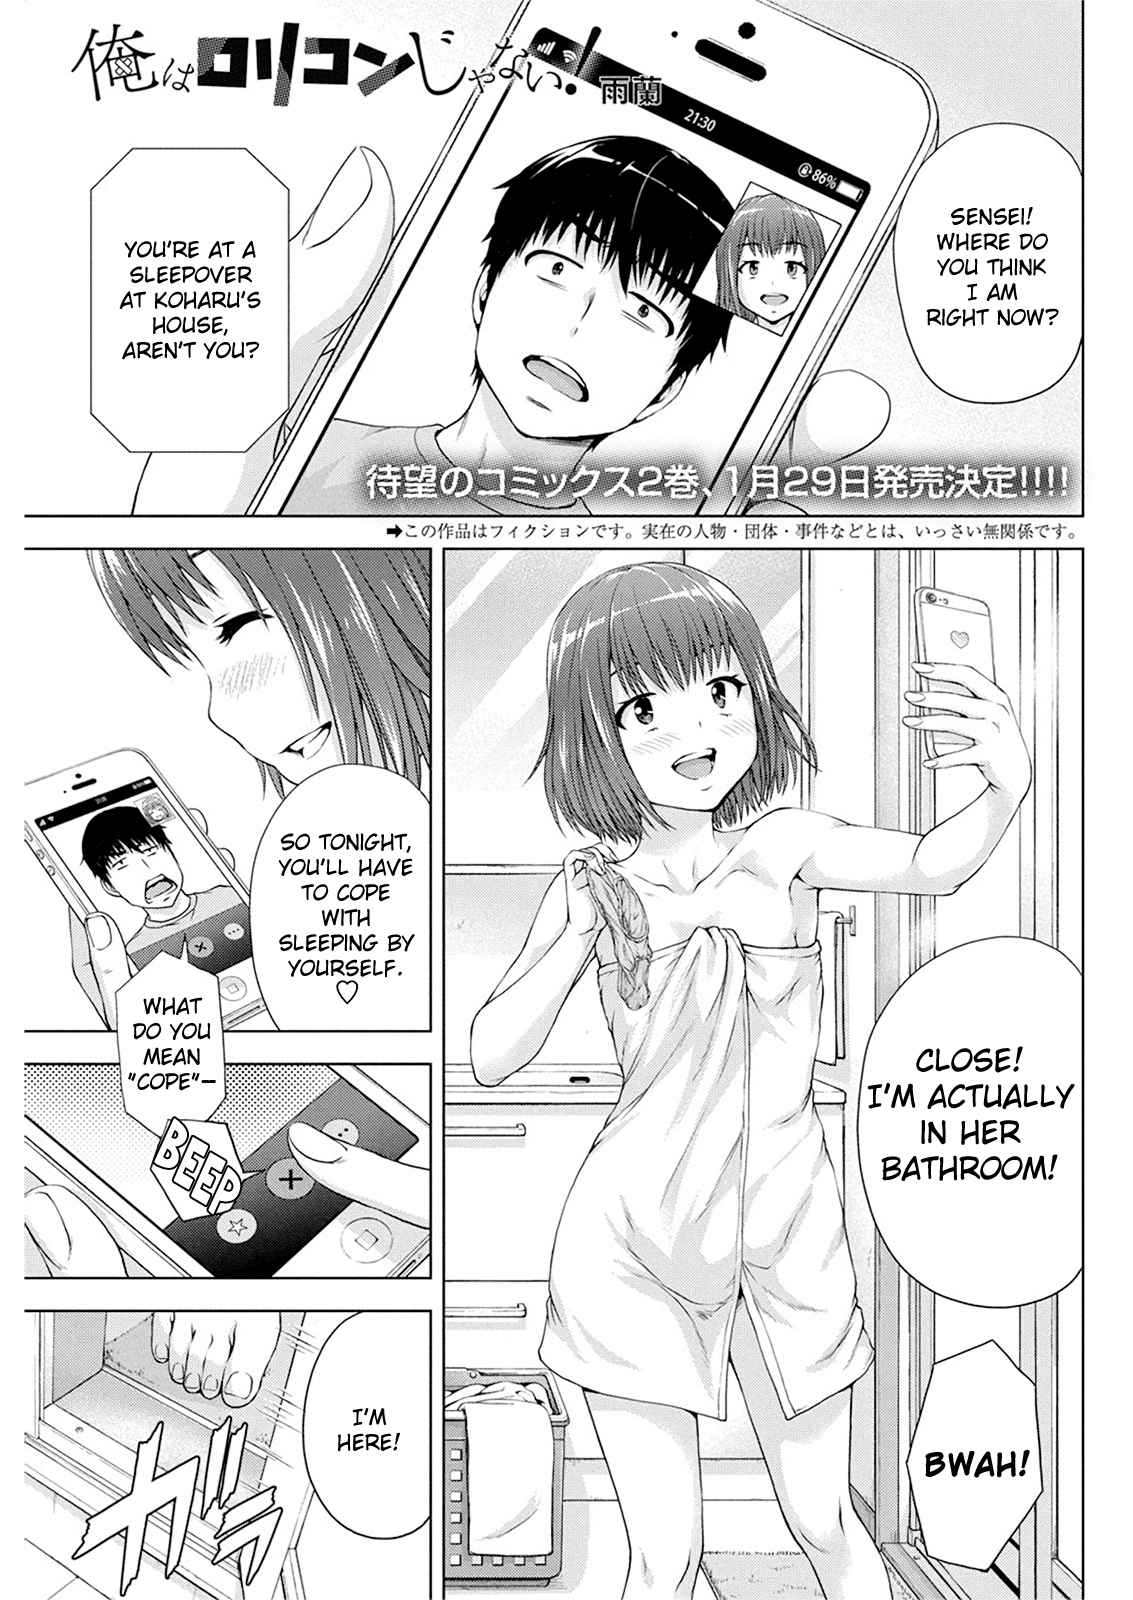 I'm Not a Lolicon! Vol. 3 Ch. 18 Show Me Yours